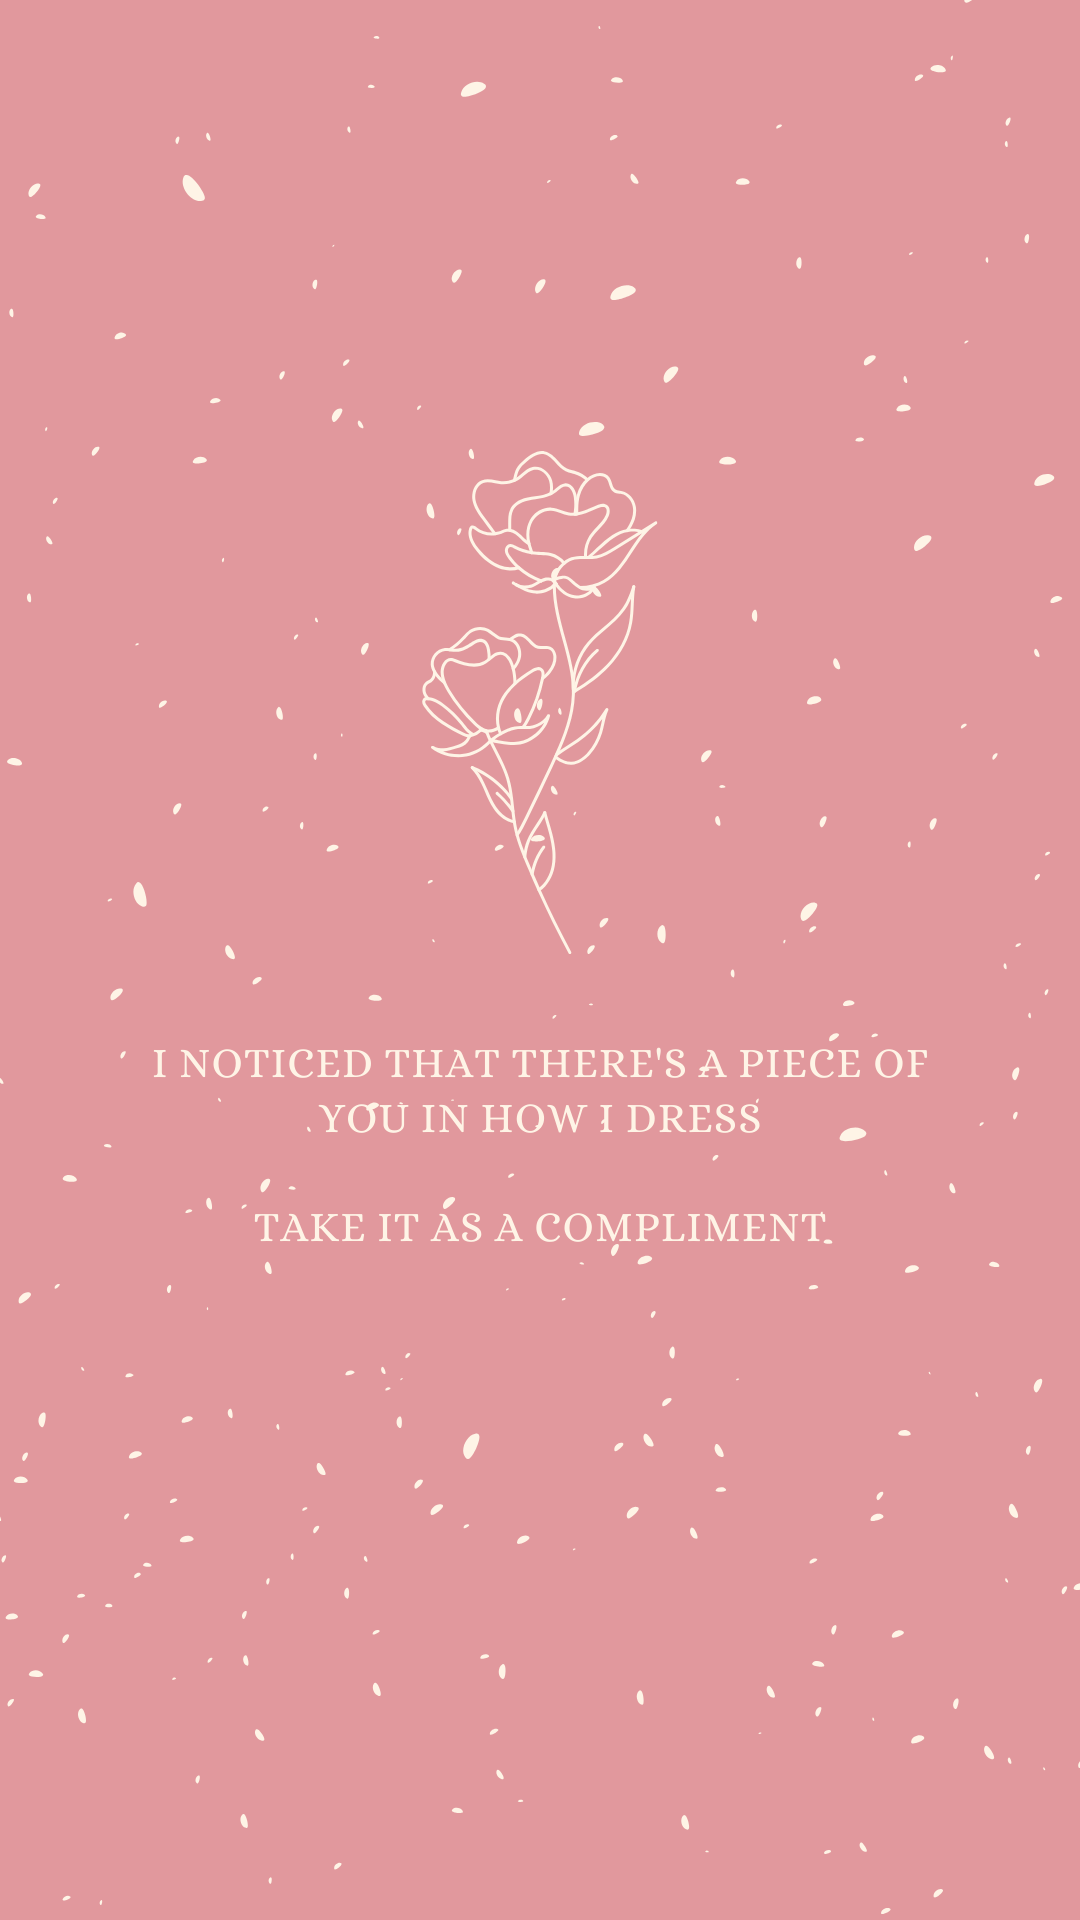 A quote on a pink background with a white flower. - Harry Styles